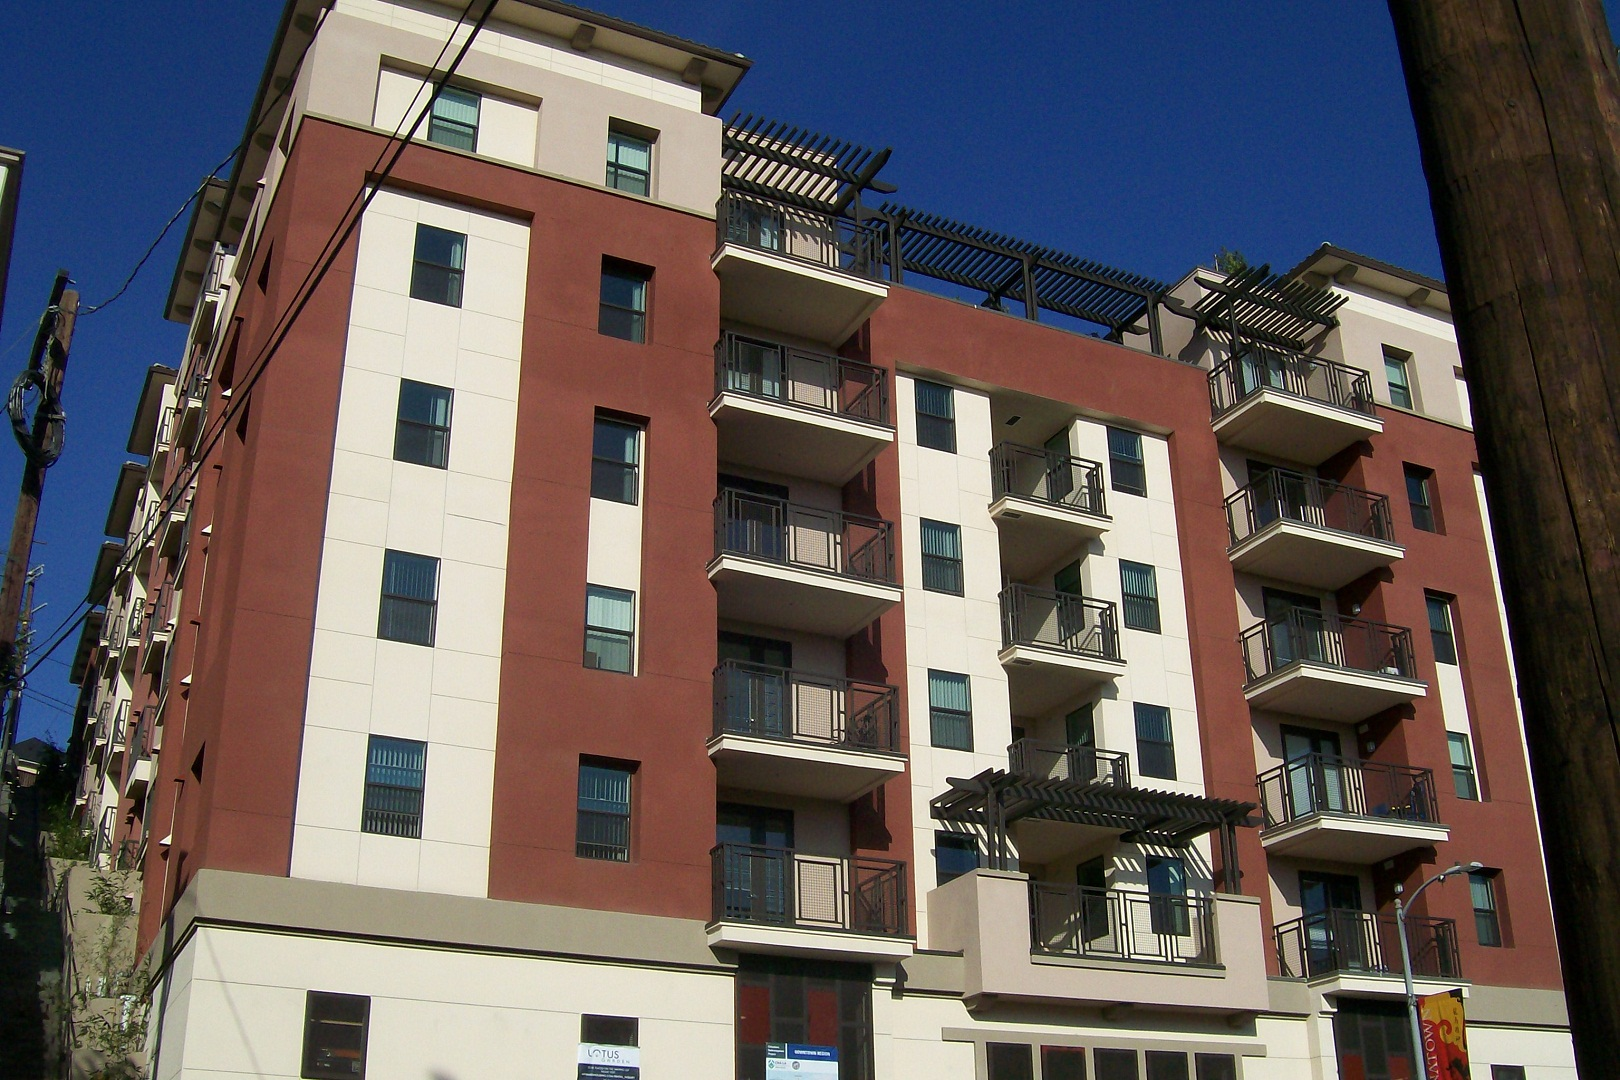 Image of 6 story building with balconies and outside corridors